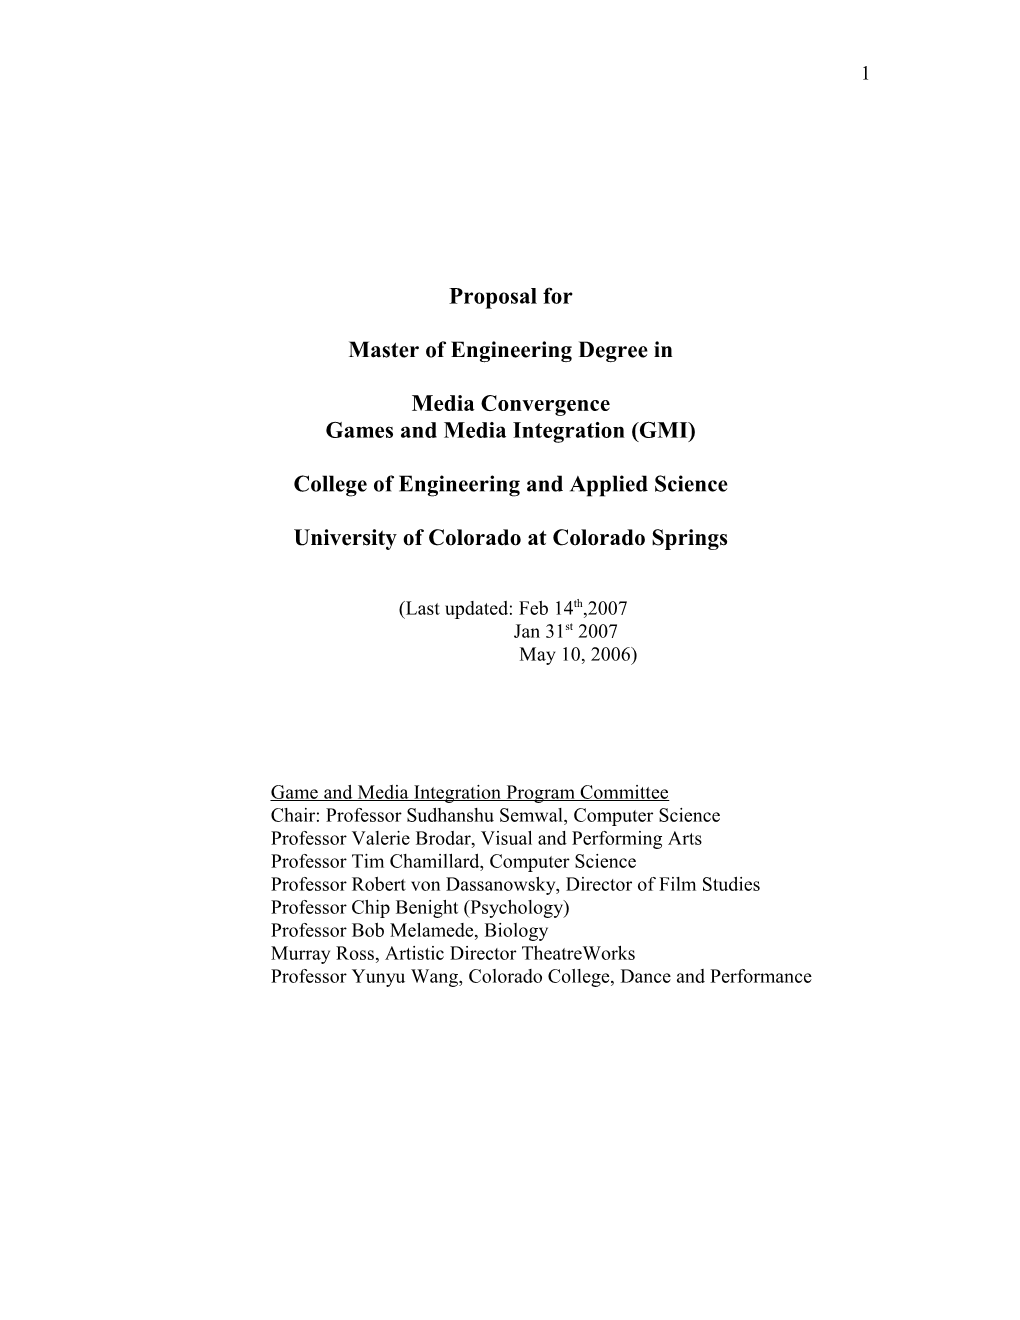 Master of Engineering Degree In